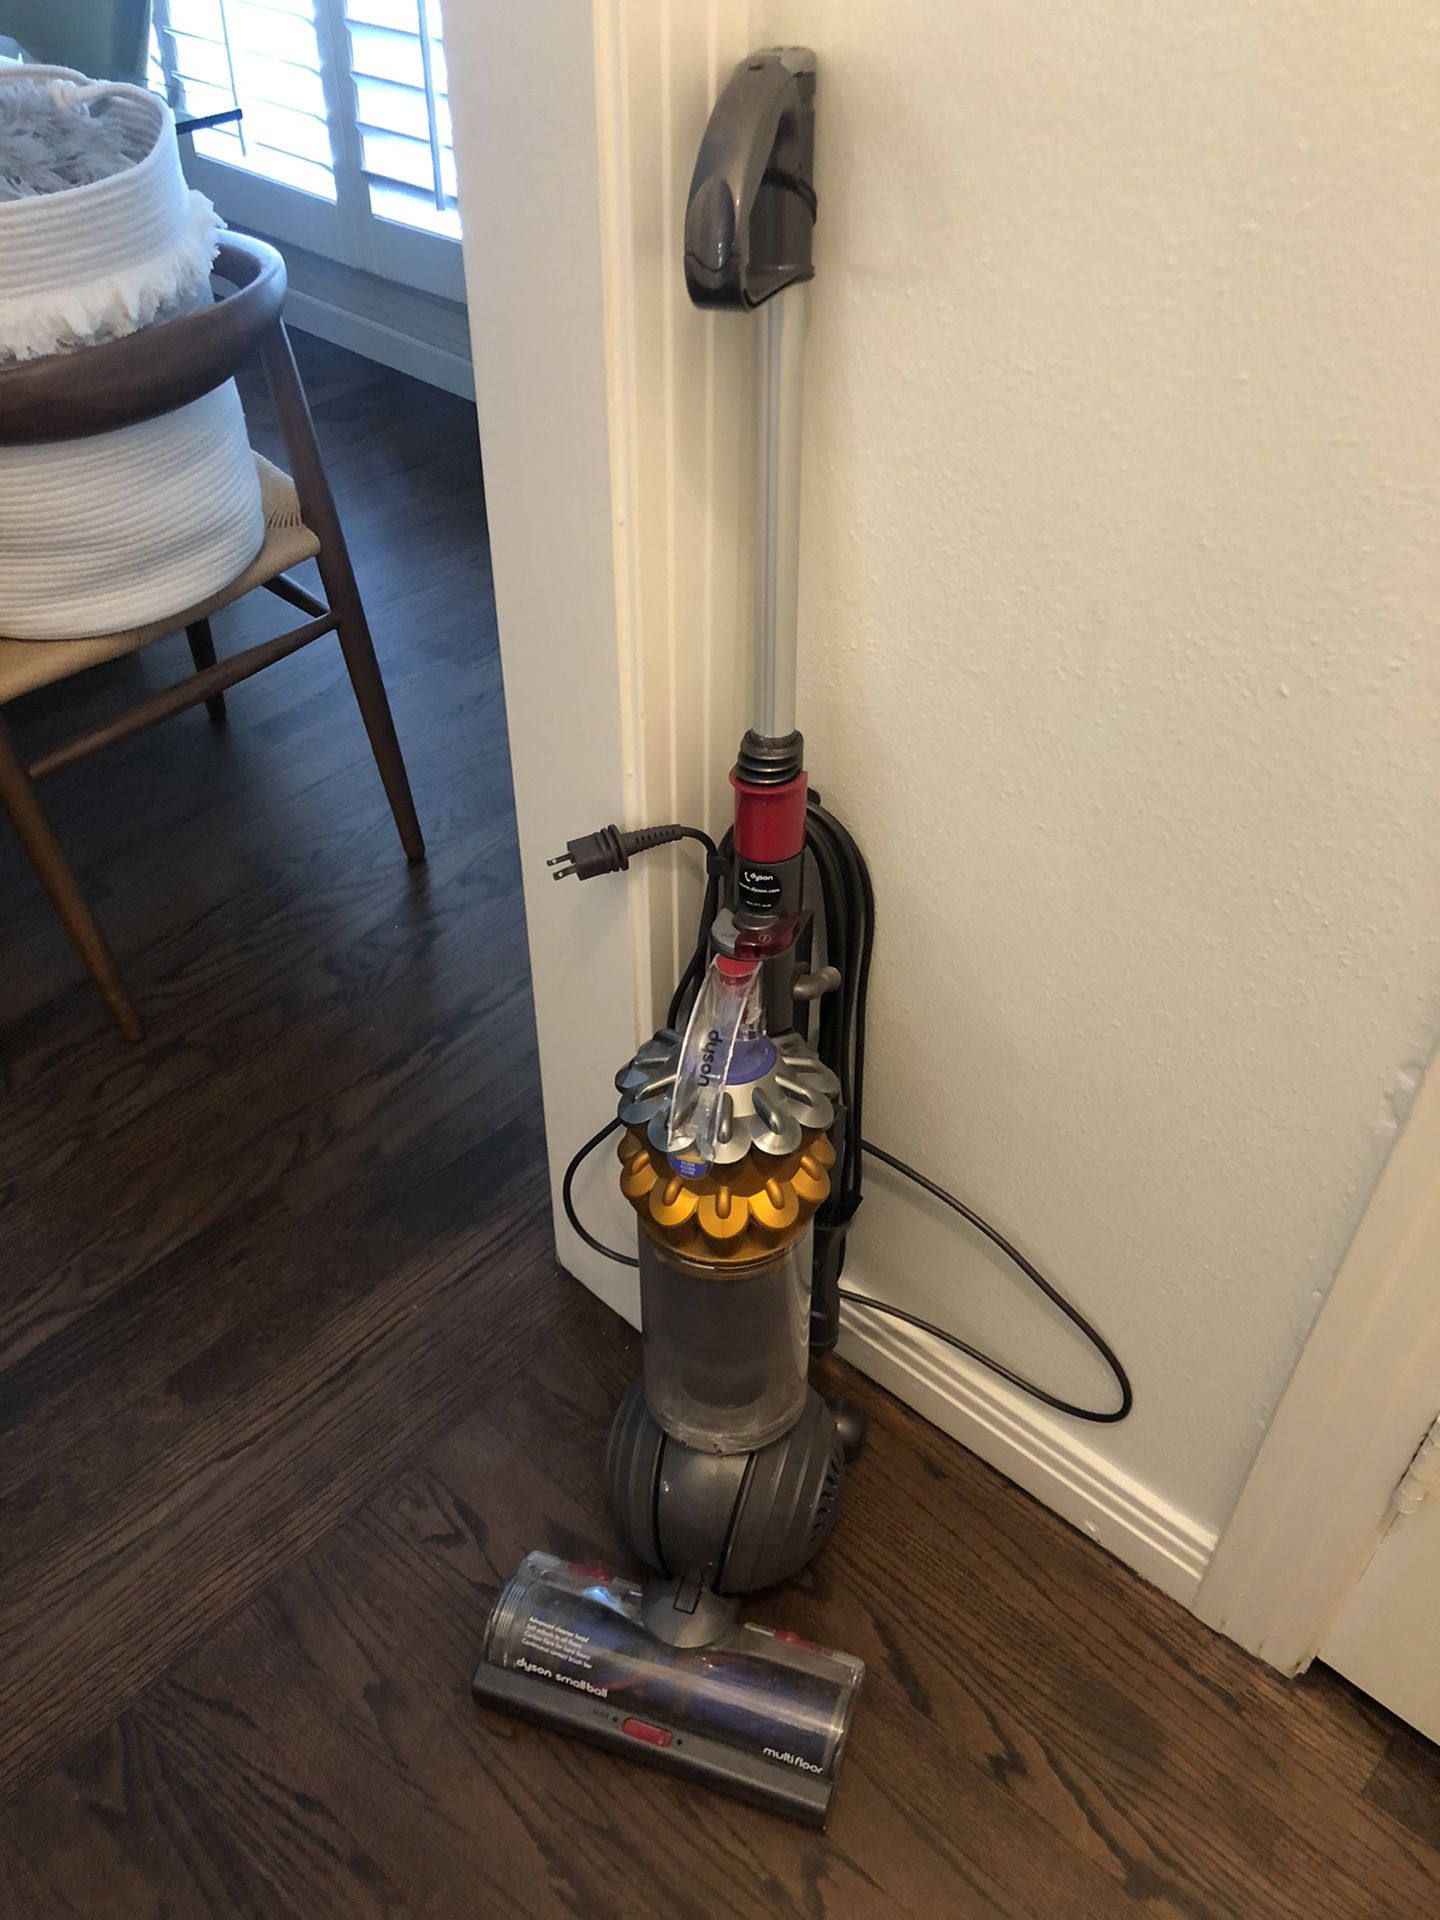 Dyson small ball upright vacuum. Used